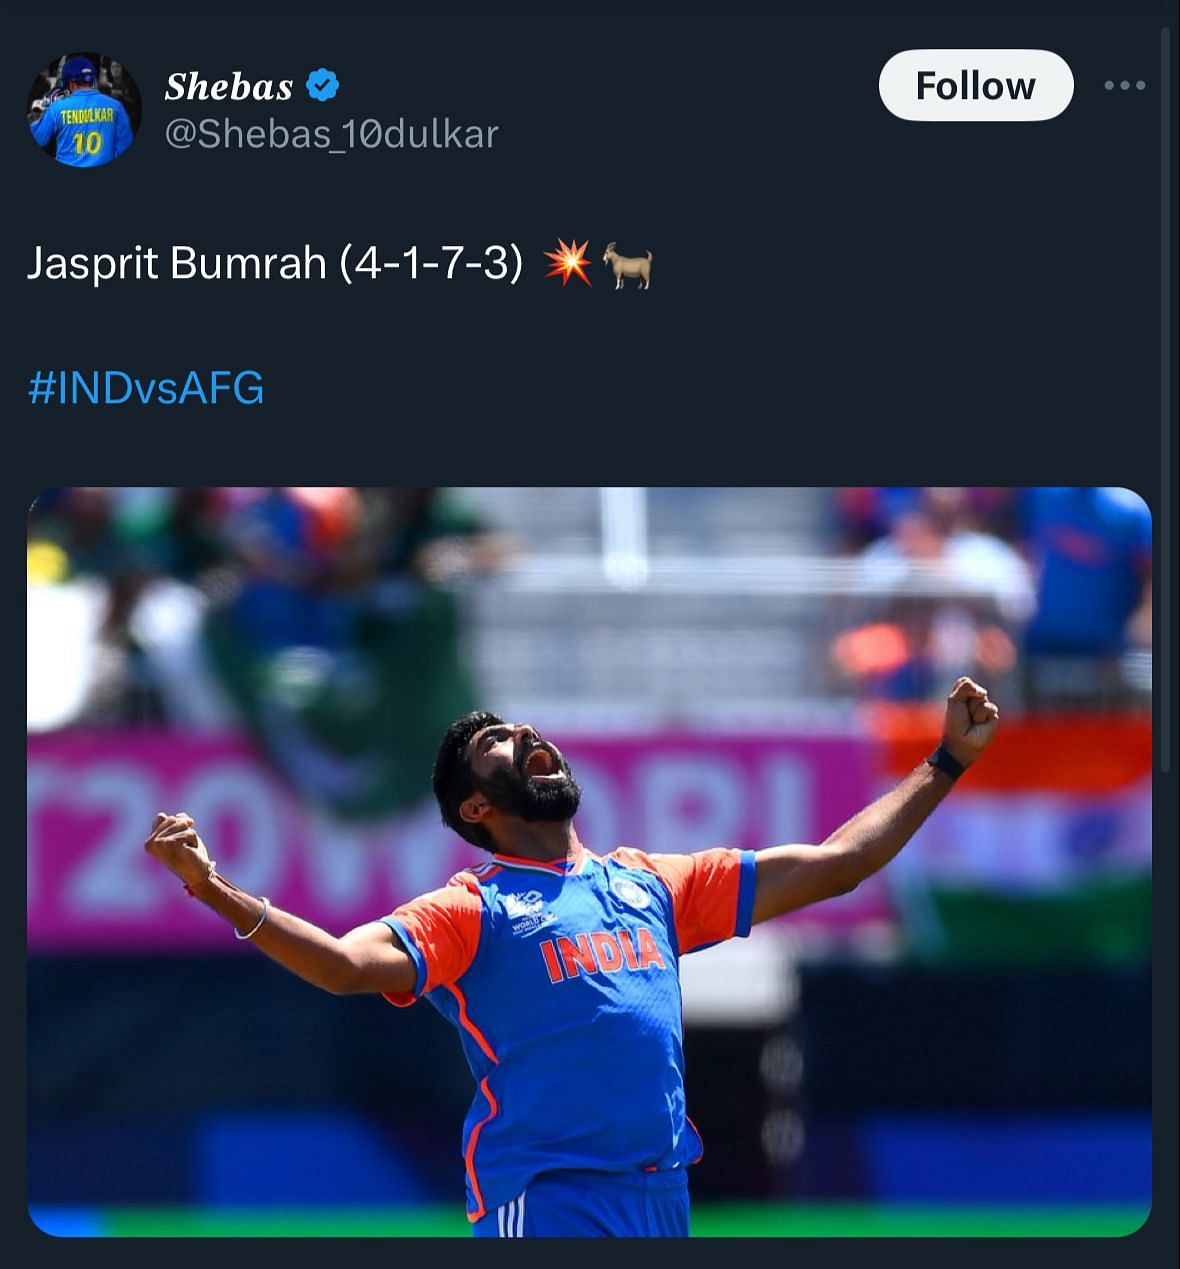 Bumrah delivered exceptional figures against Afghanistan - 1 maiden, 7 runs conceded, and 3 wickets.